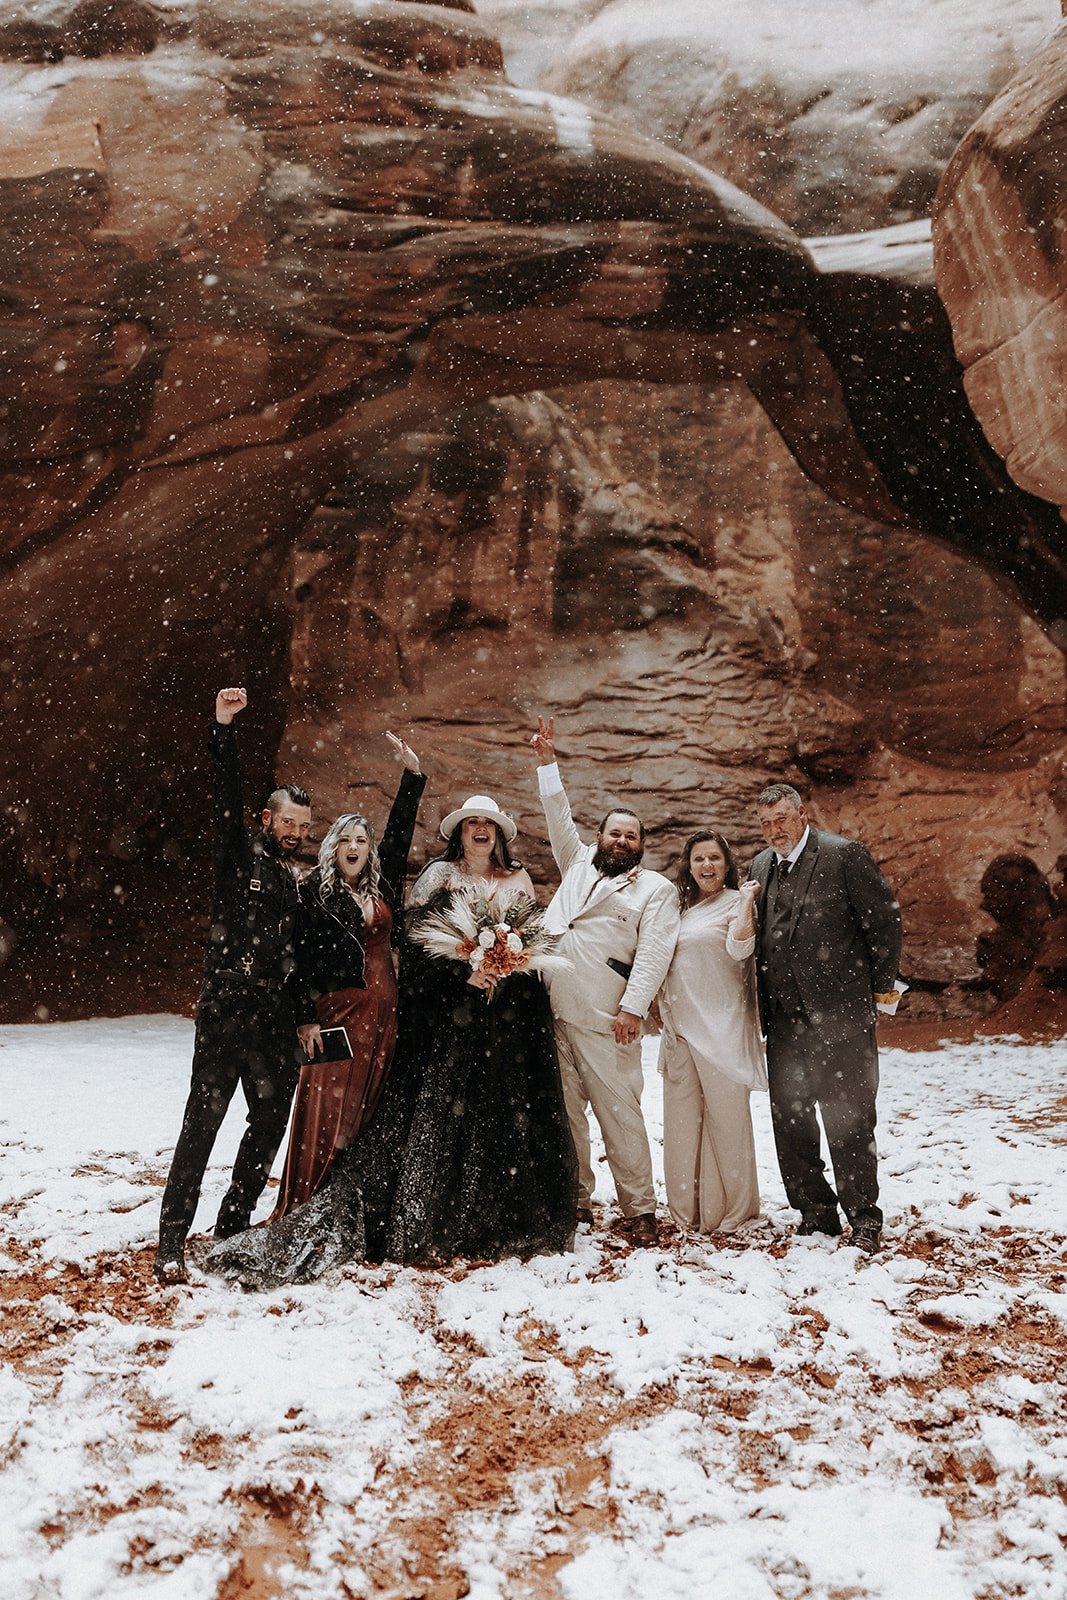 A wedding party cheering in the snow at Sand Dune Arch in Arches National Park.